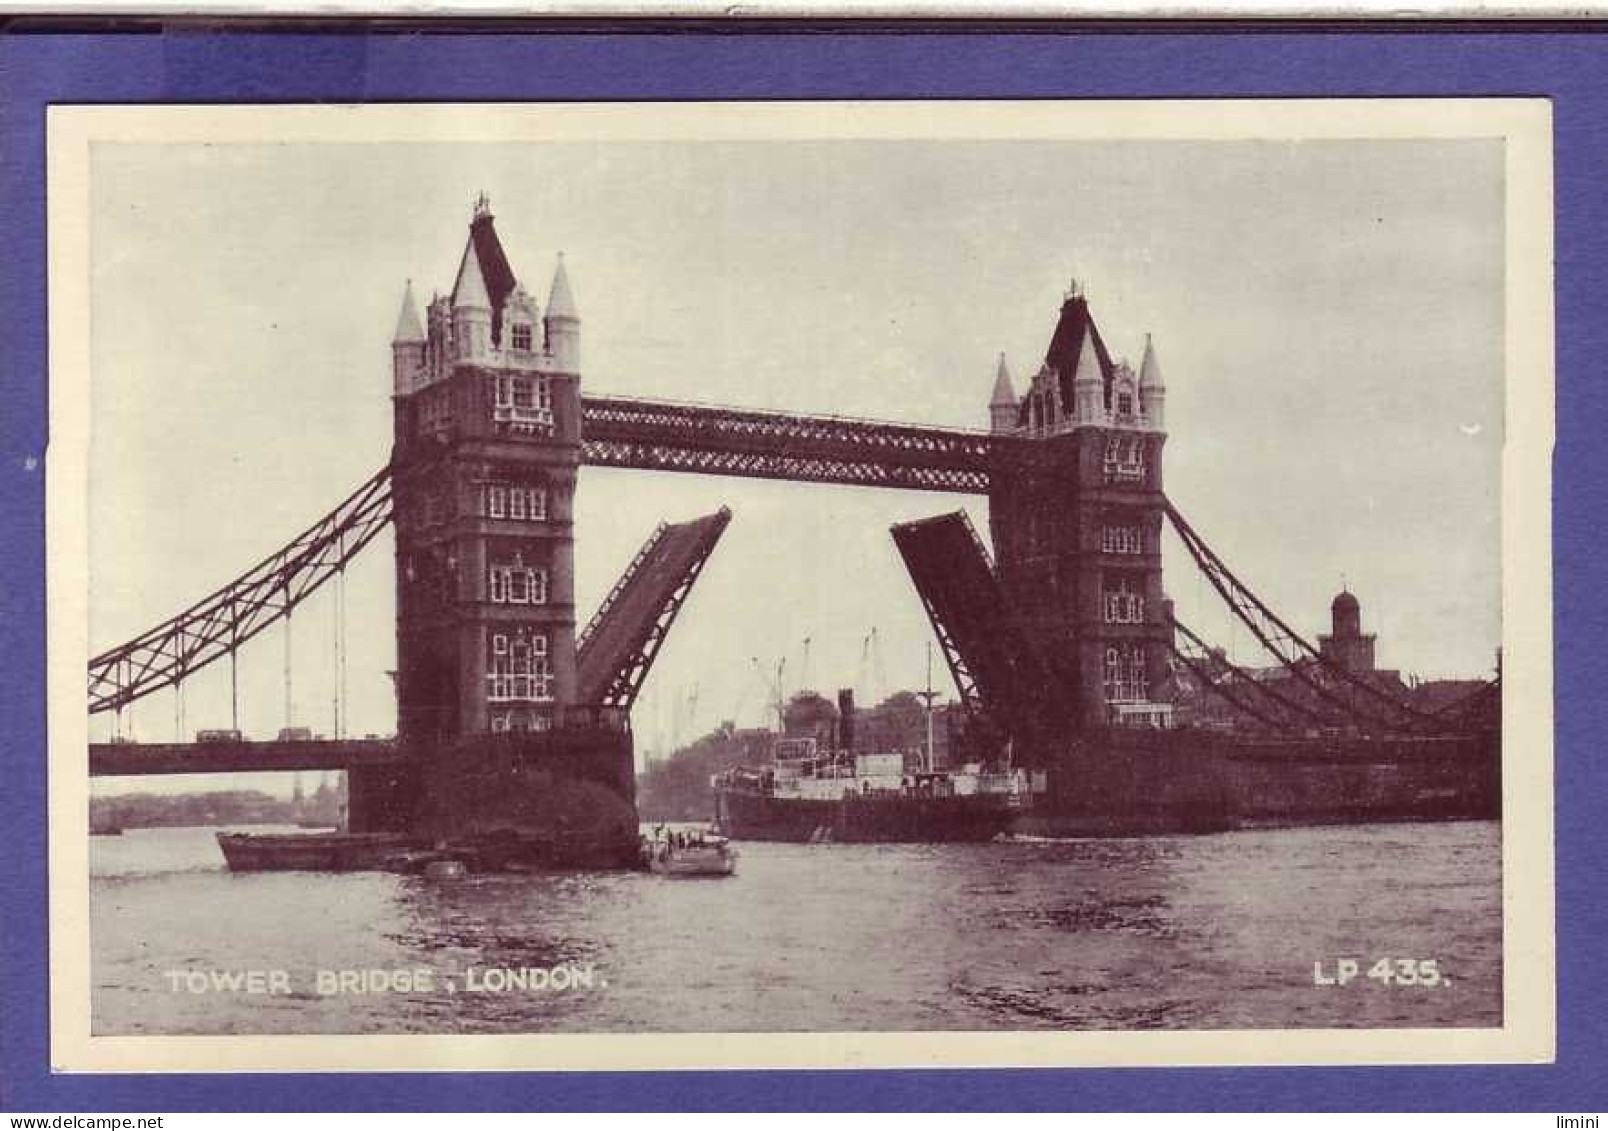 ANGLETERRE - LONDRES - TOWER BRIDGE - PAQUEBOT -  - Tower Of London